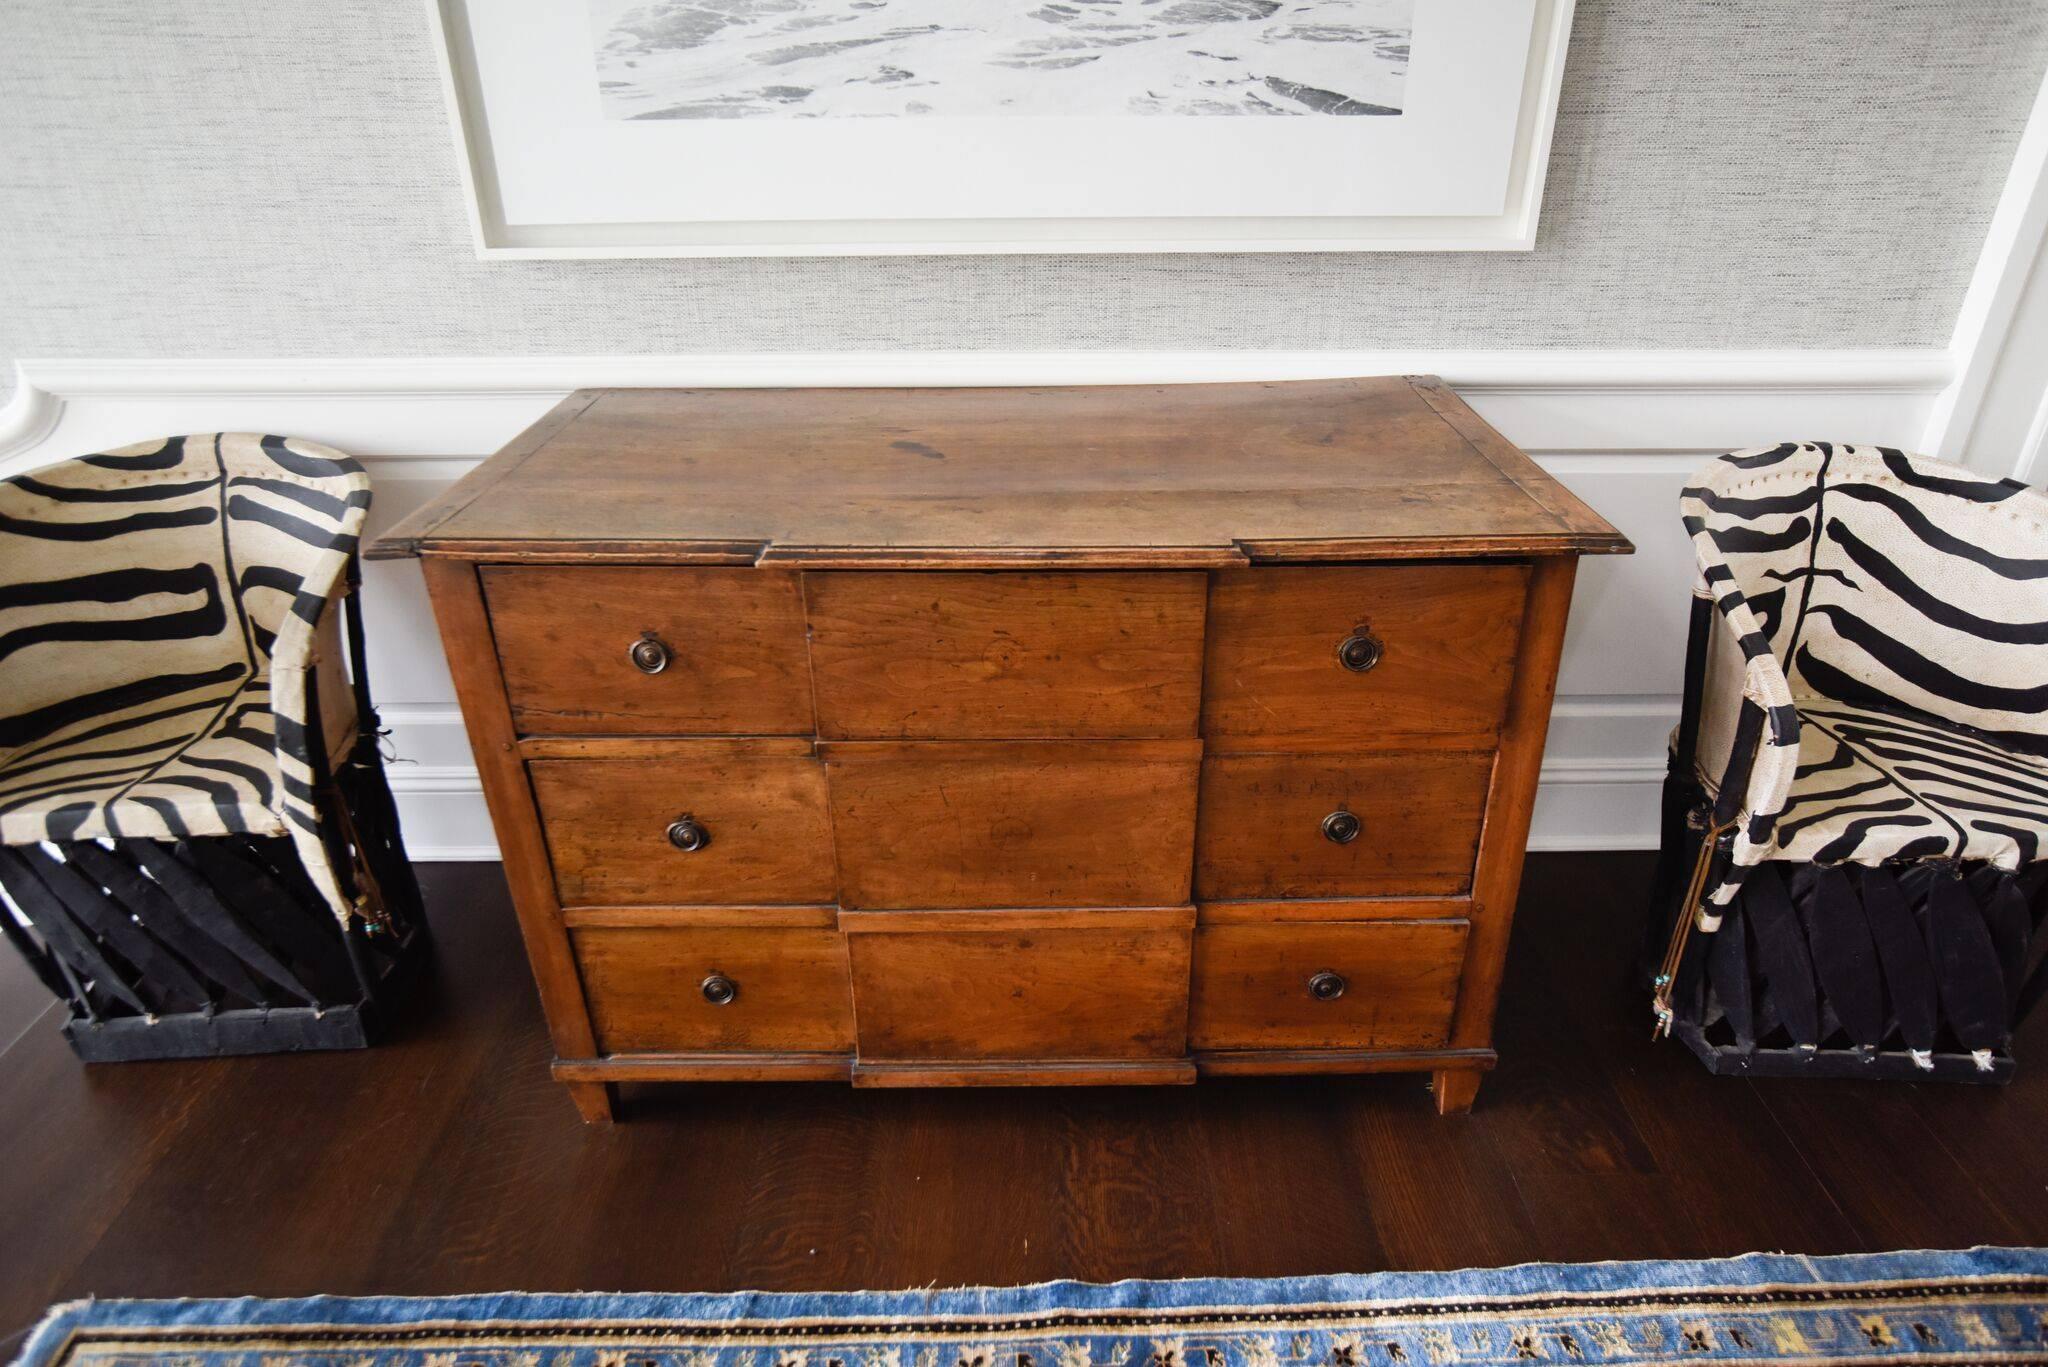 An 18th century French commode. Made from walnut, this three-drawer antique combines timeless form and always-timely storage.